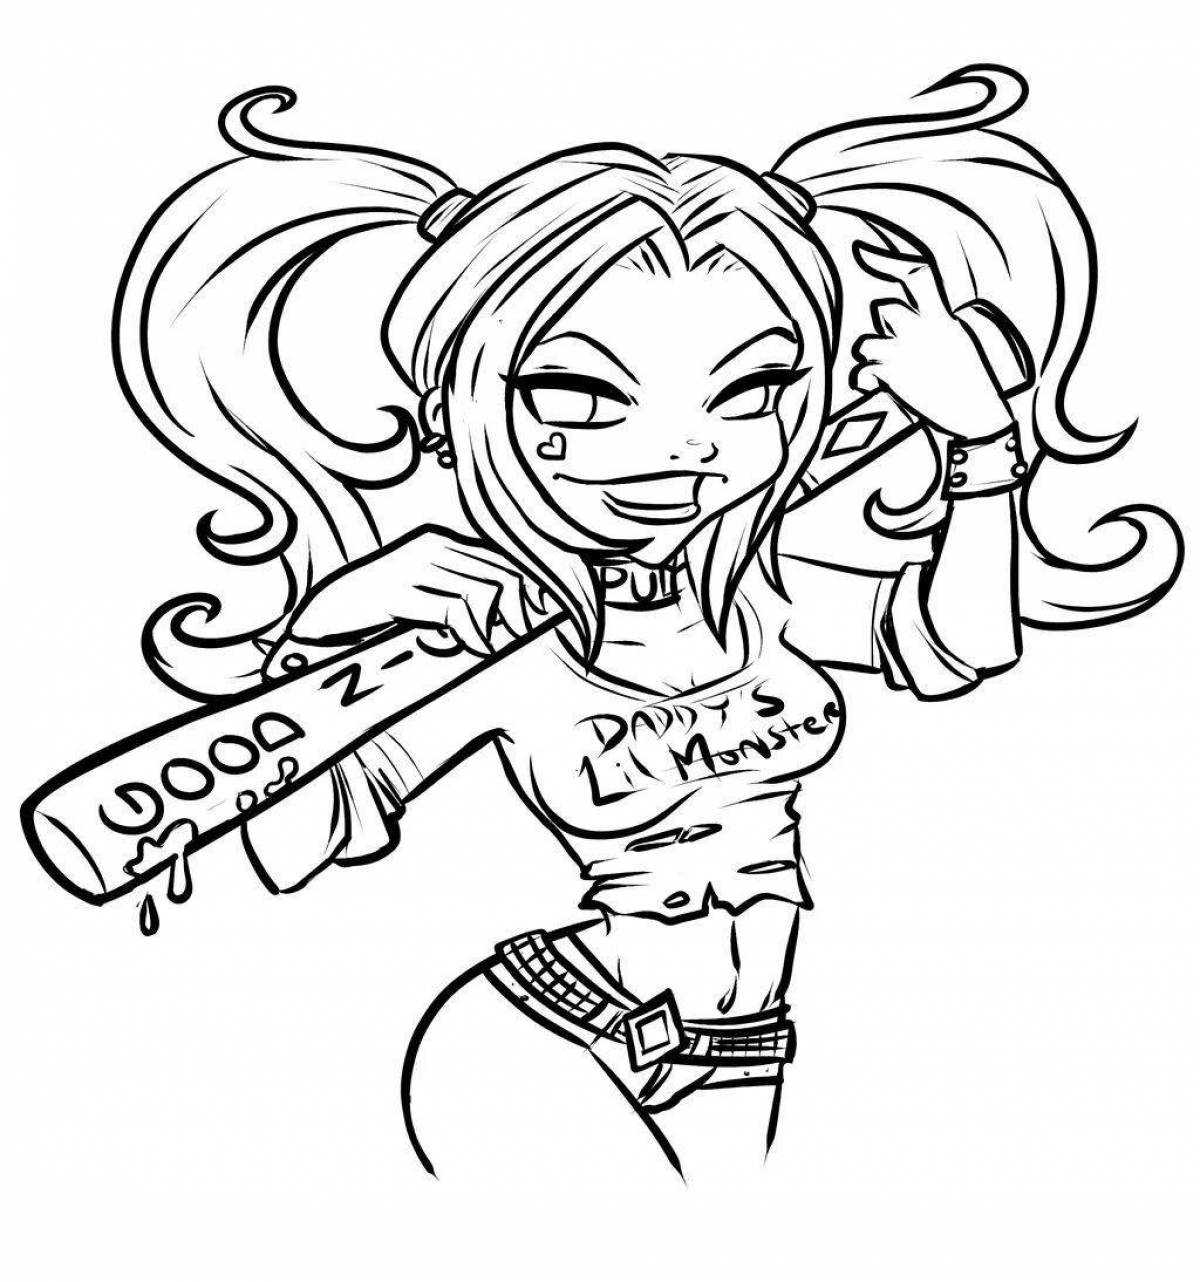 Harley quinn invitation coloring book for girls